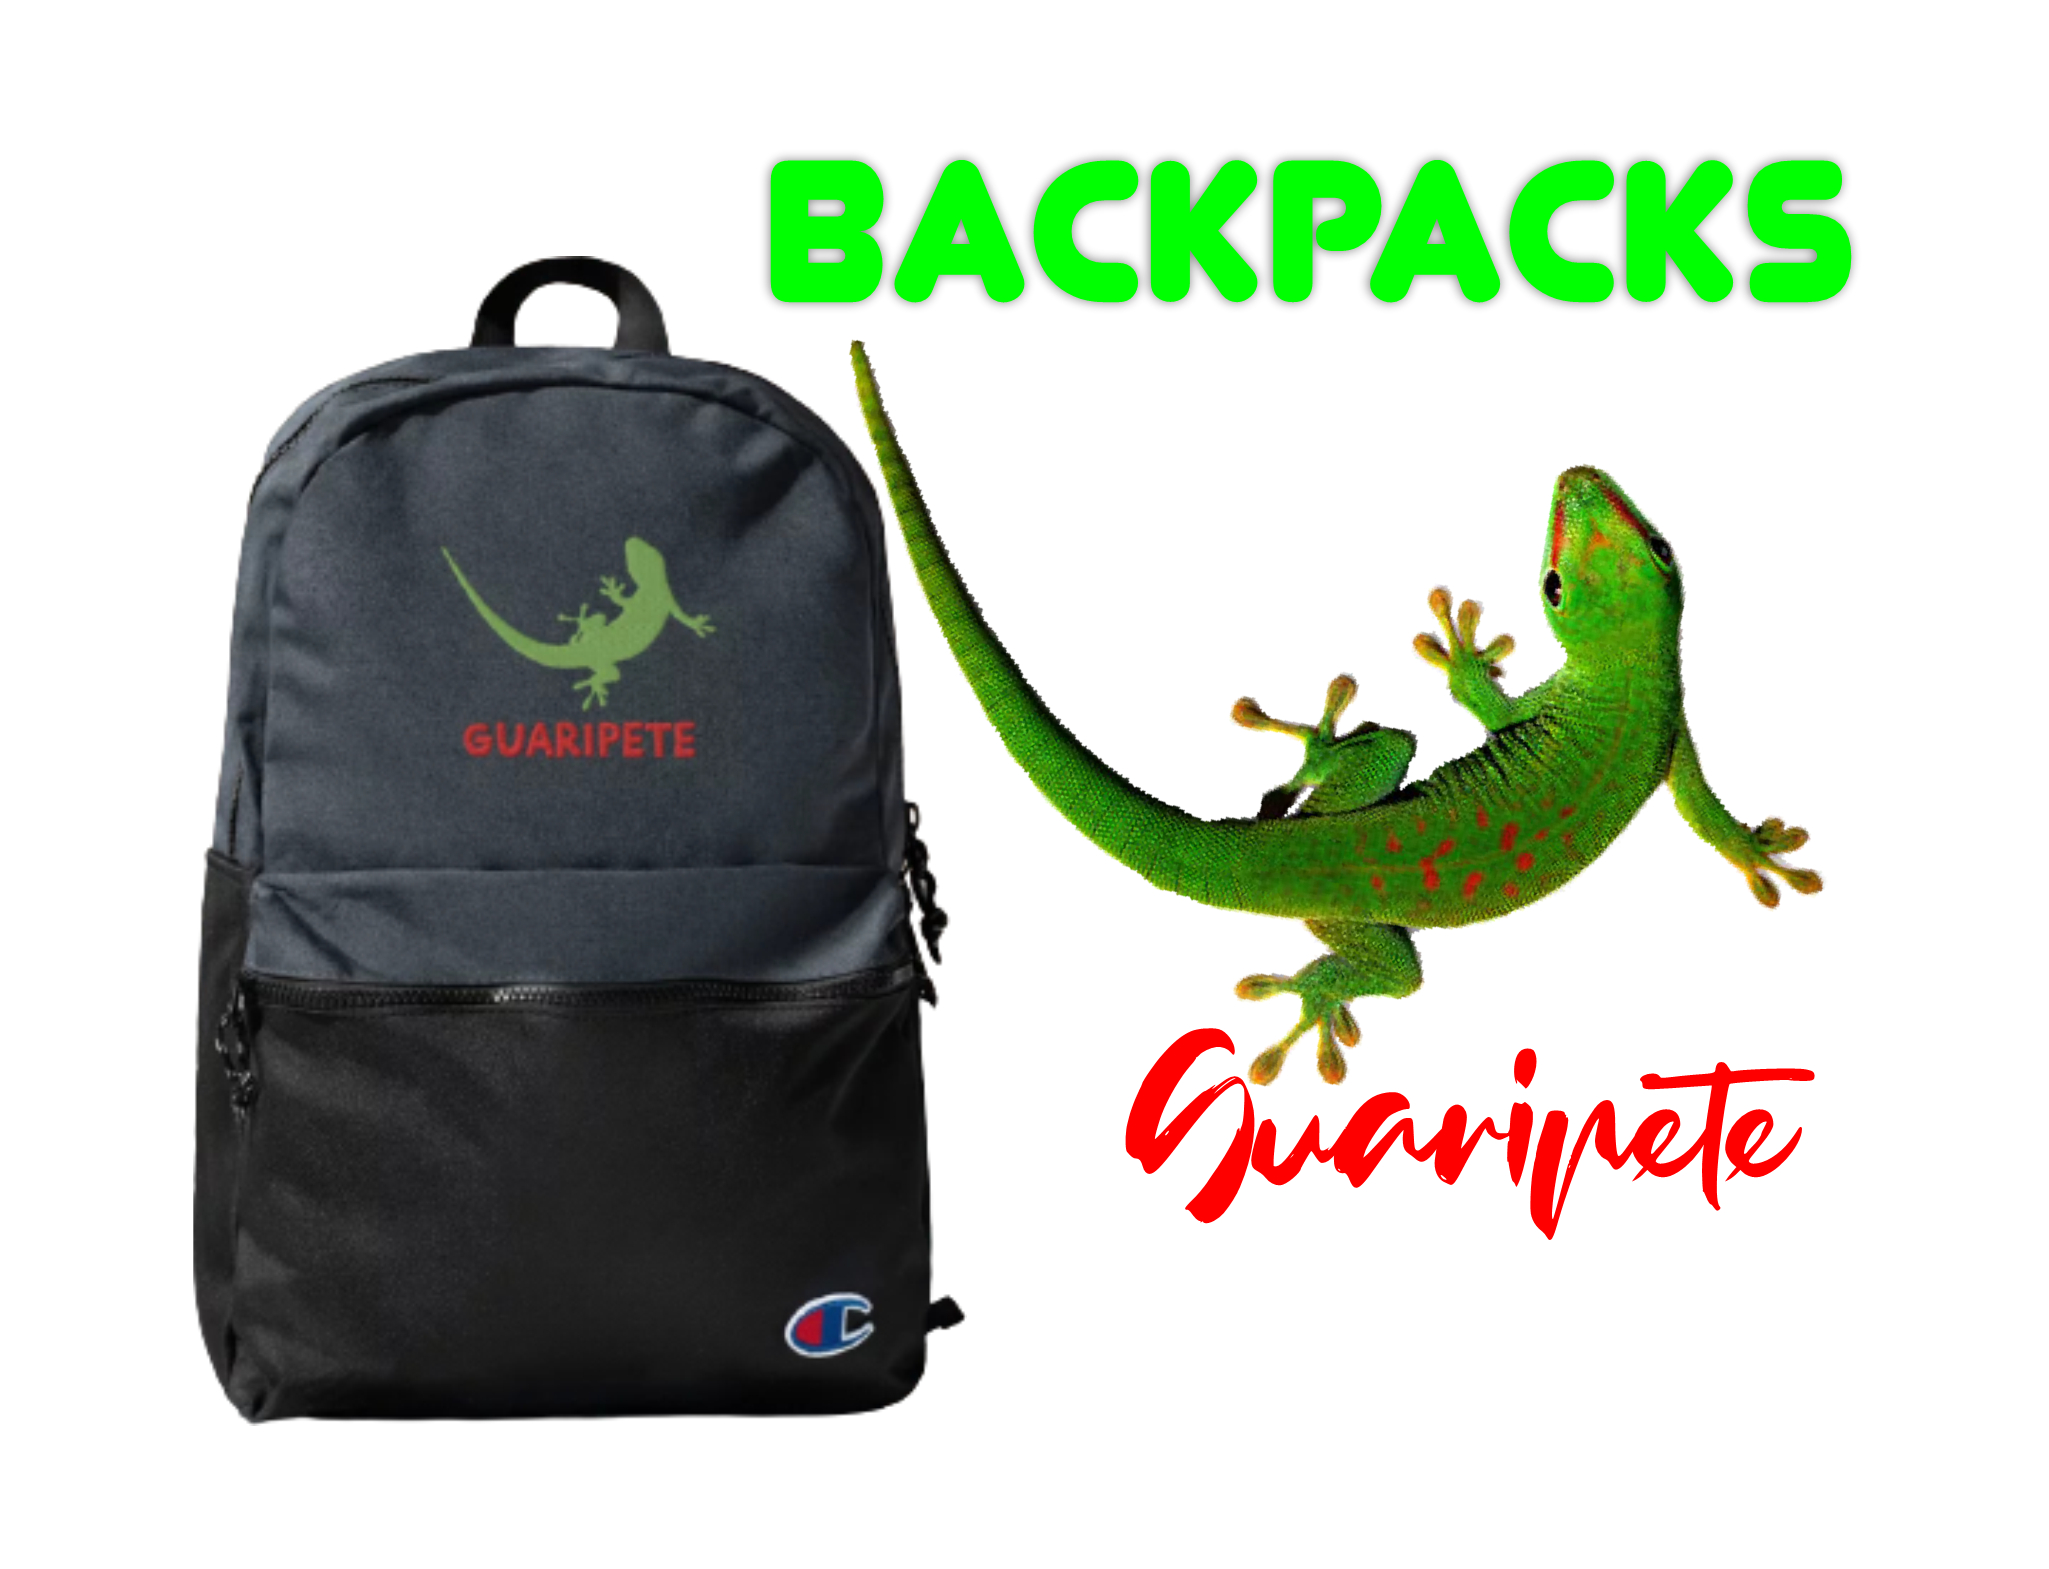 Backpacks with the exclusive design of the recognized brand Guaripete